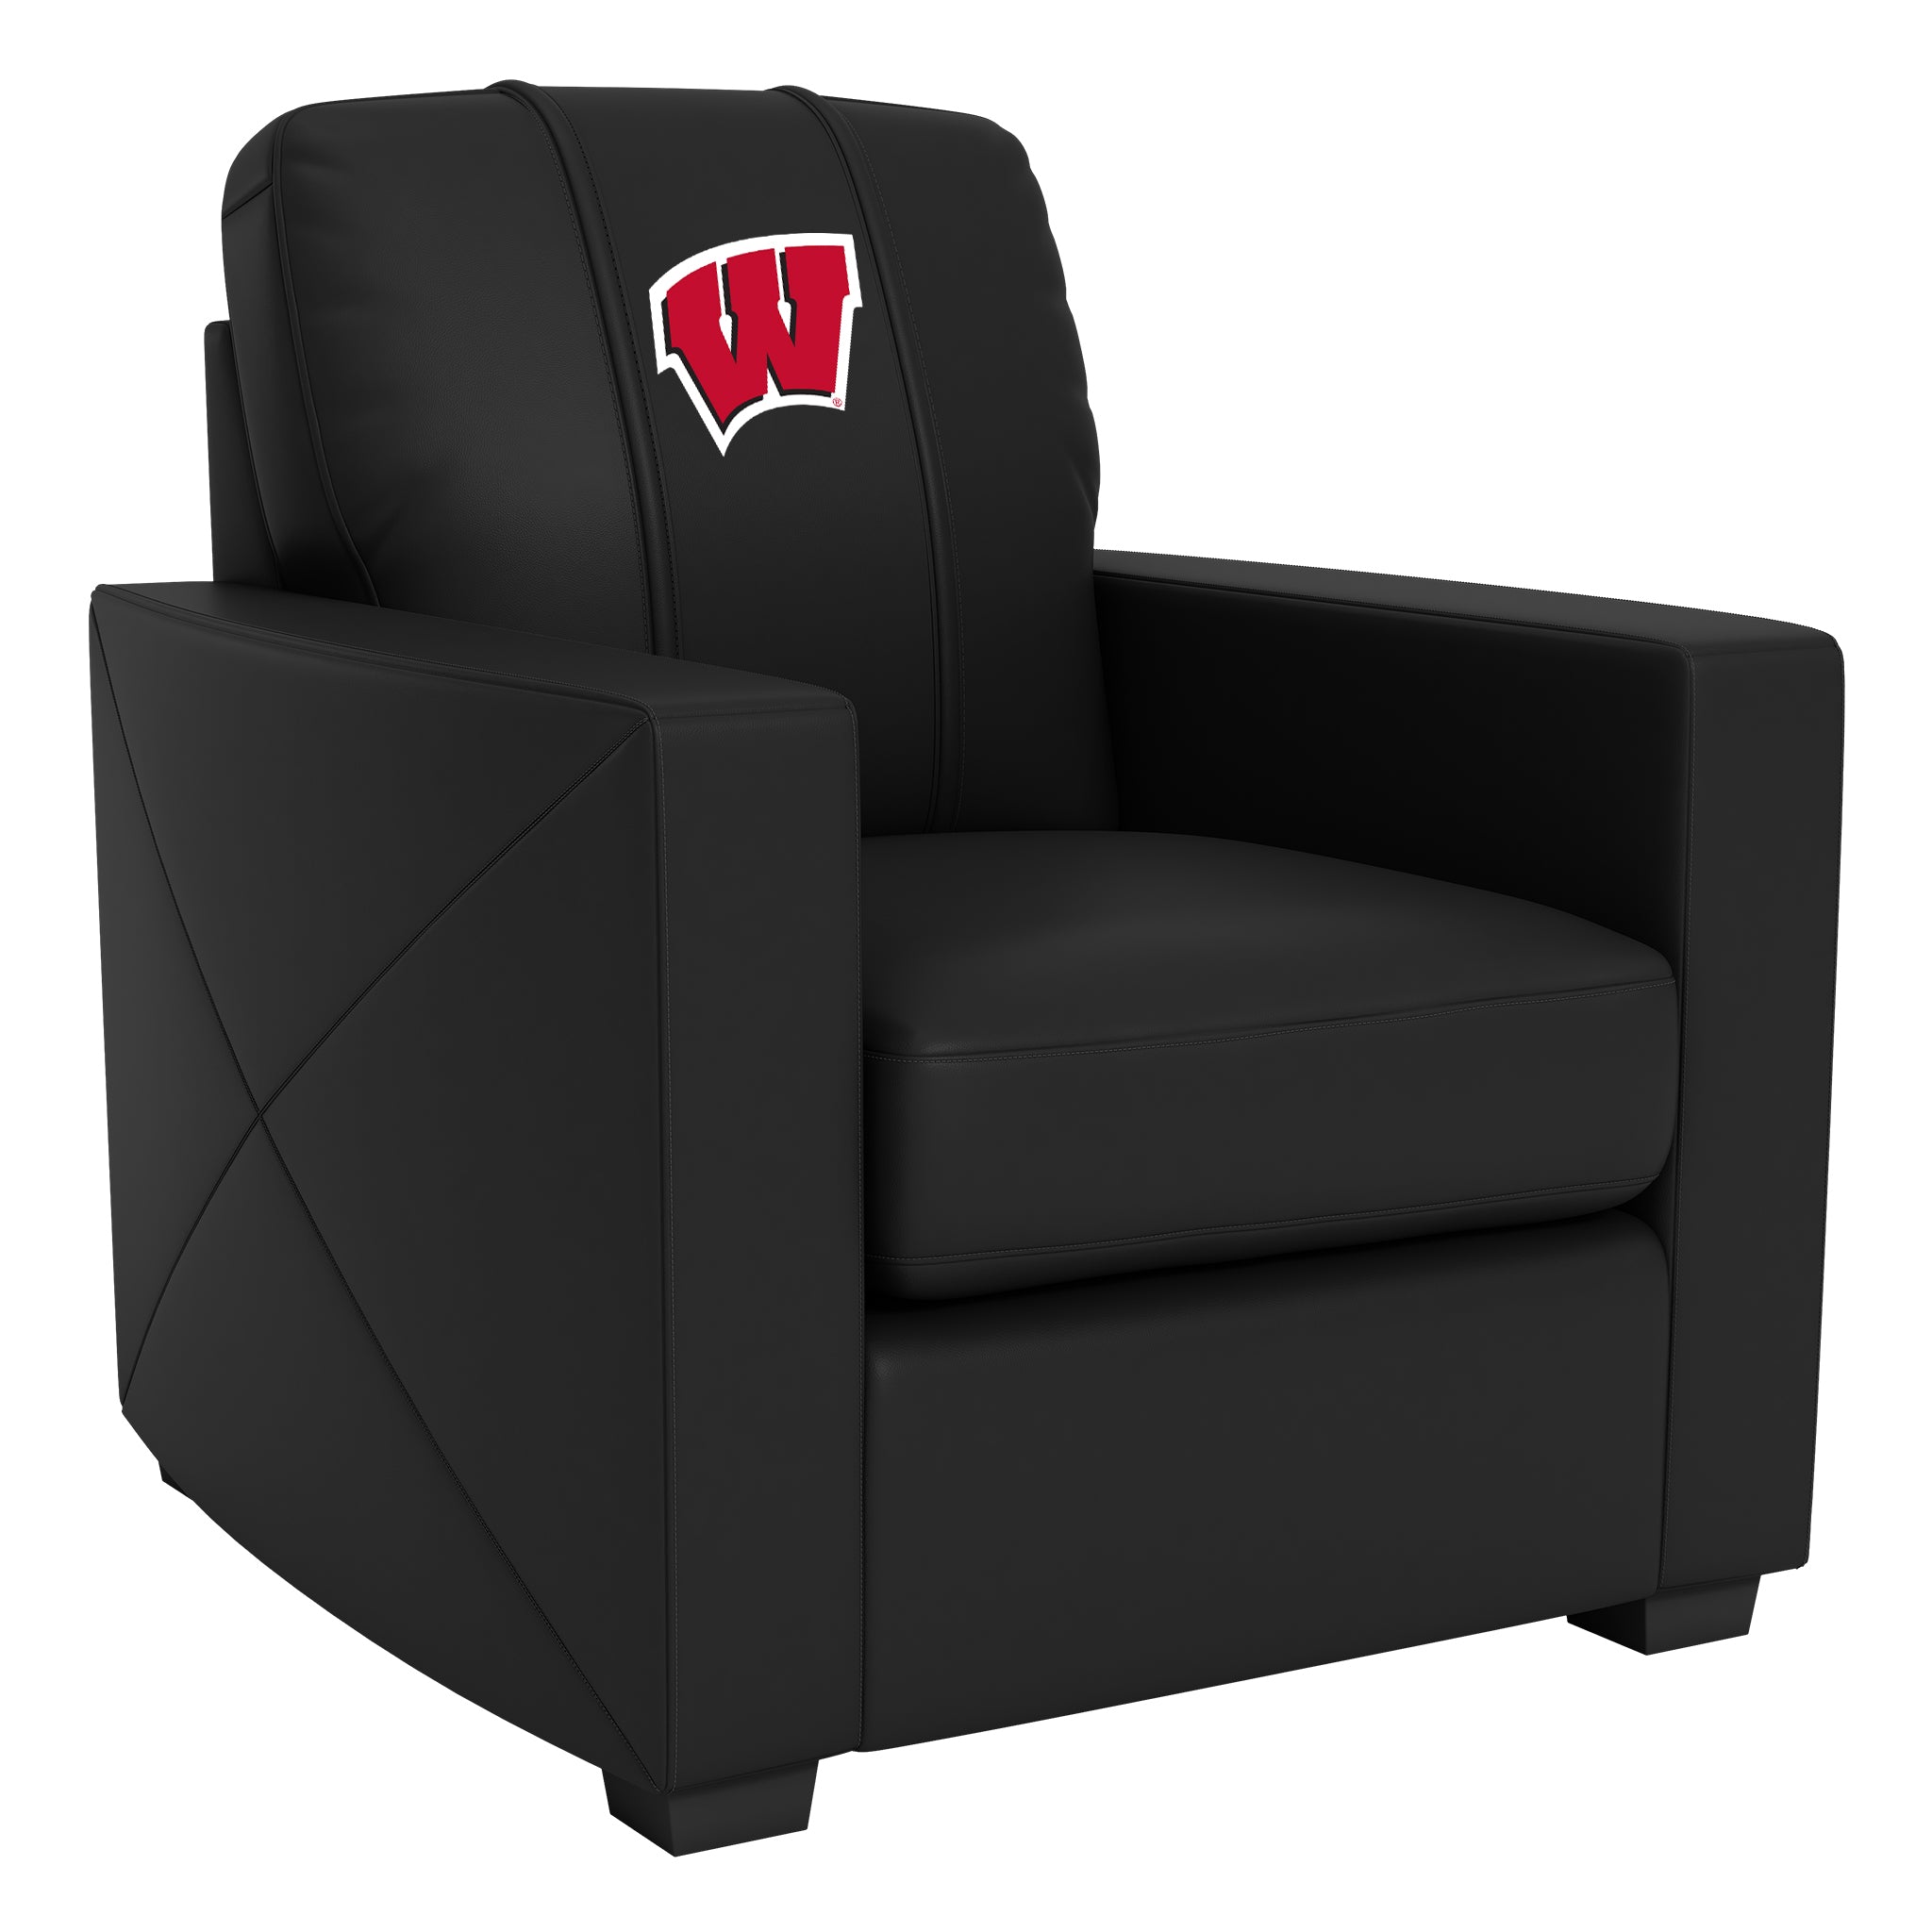 Wisconsin Badgers Silver Club Chair with Wisconsin Badgers Logo